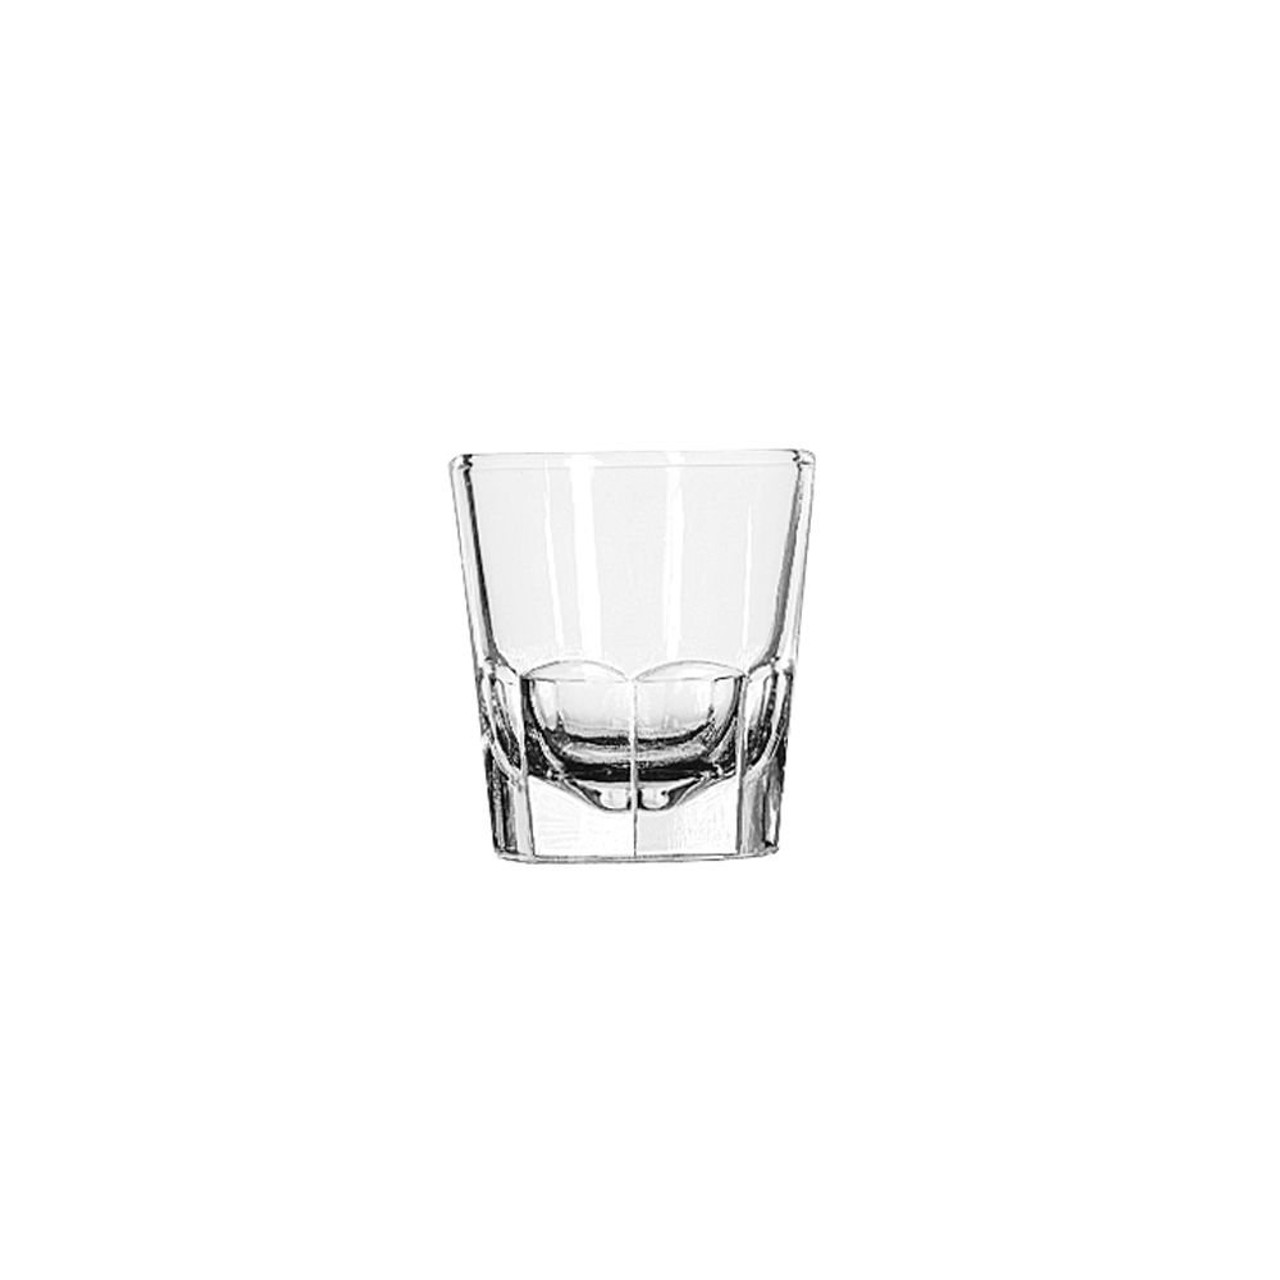 Libbey 36-Piece Set of Unique Paneled Base 5 oz. Rocks/Old Fashioned Glasses-Chicken Pieces